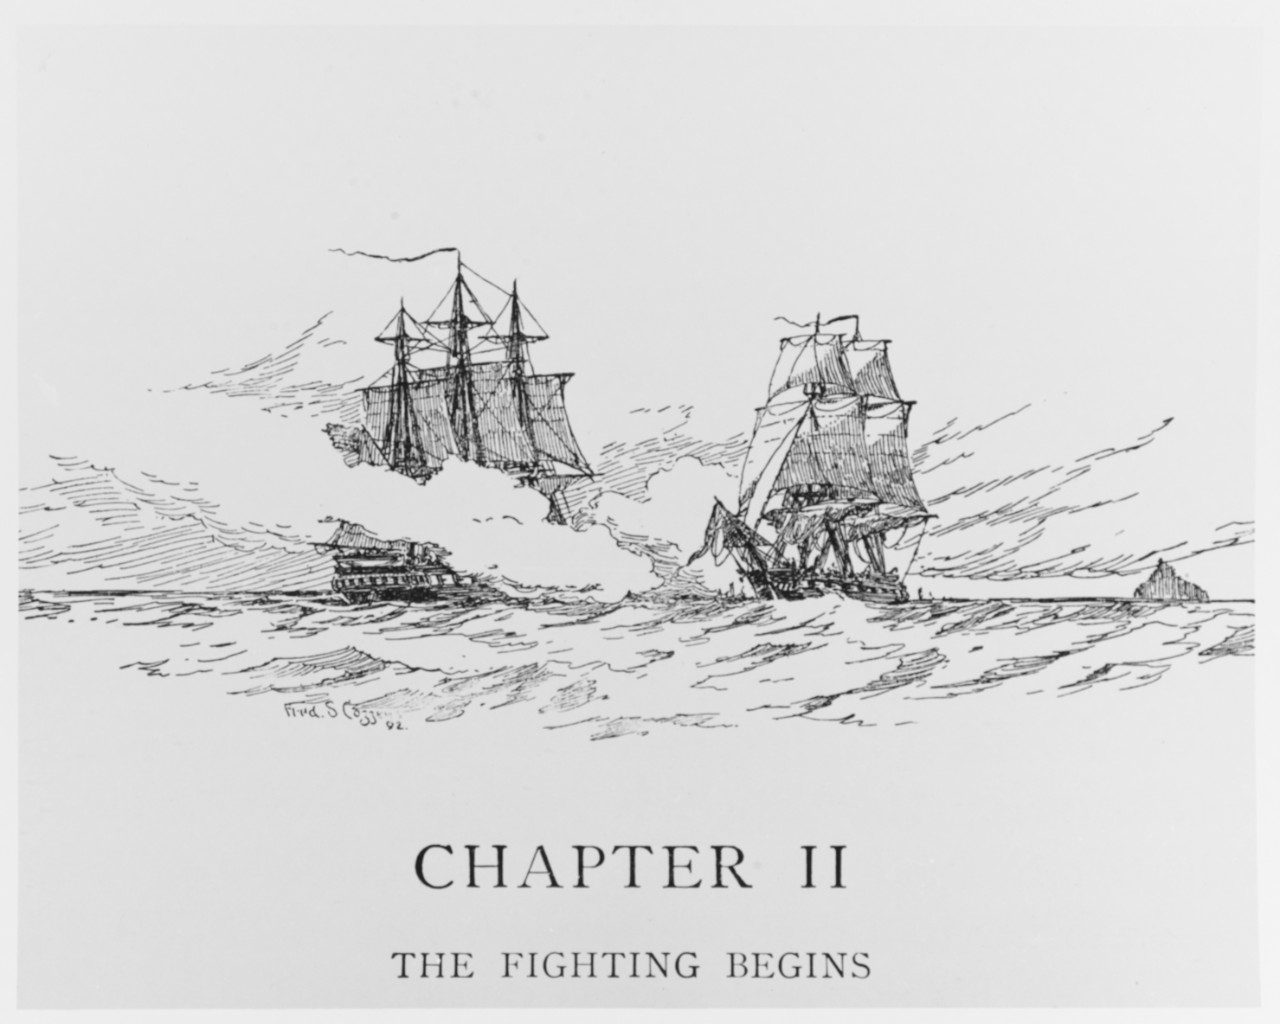 Photo #: NH 74523  Action between USS Hornet and HMS Penguin, 23 March 1815